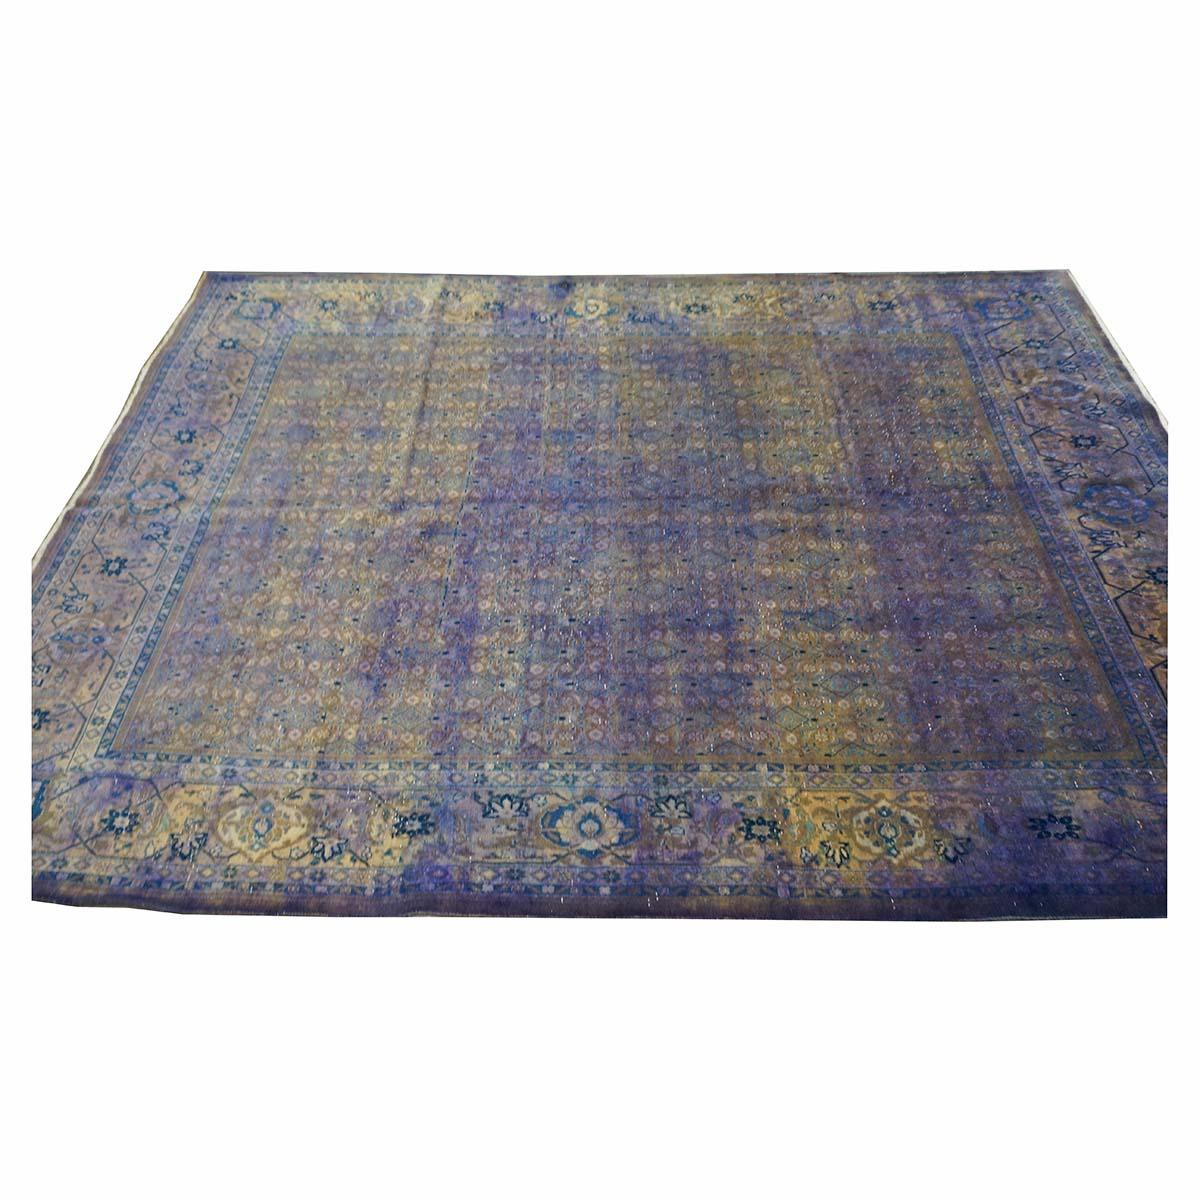 1950s Vintage Persian Mahal Modern Overdye 7x10 Purple Handmade Area Rug In Good Condition For Sale In Houston, TX